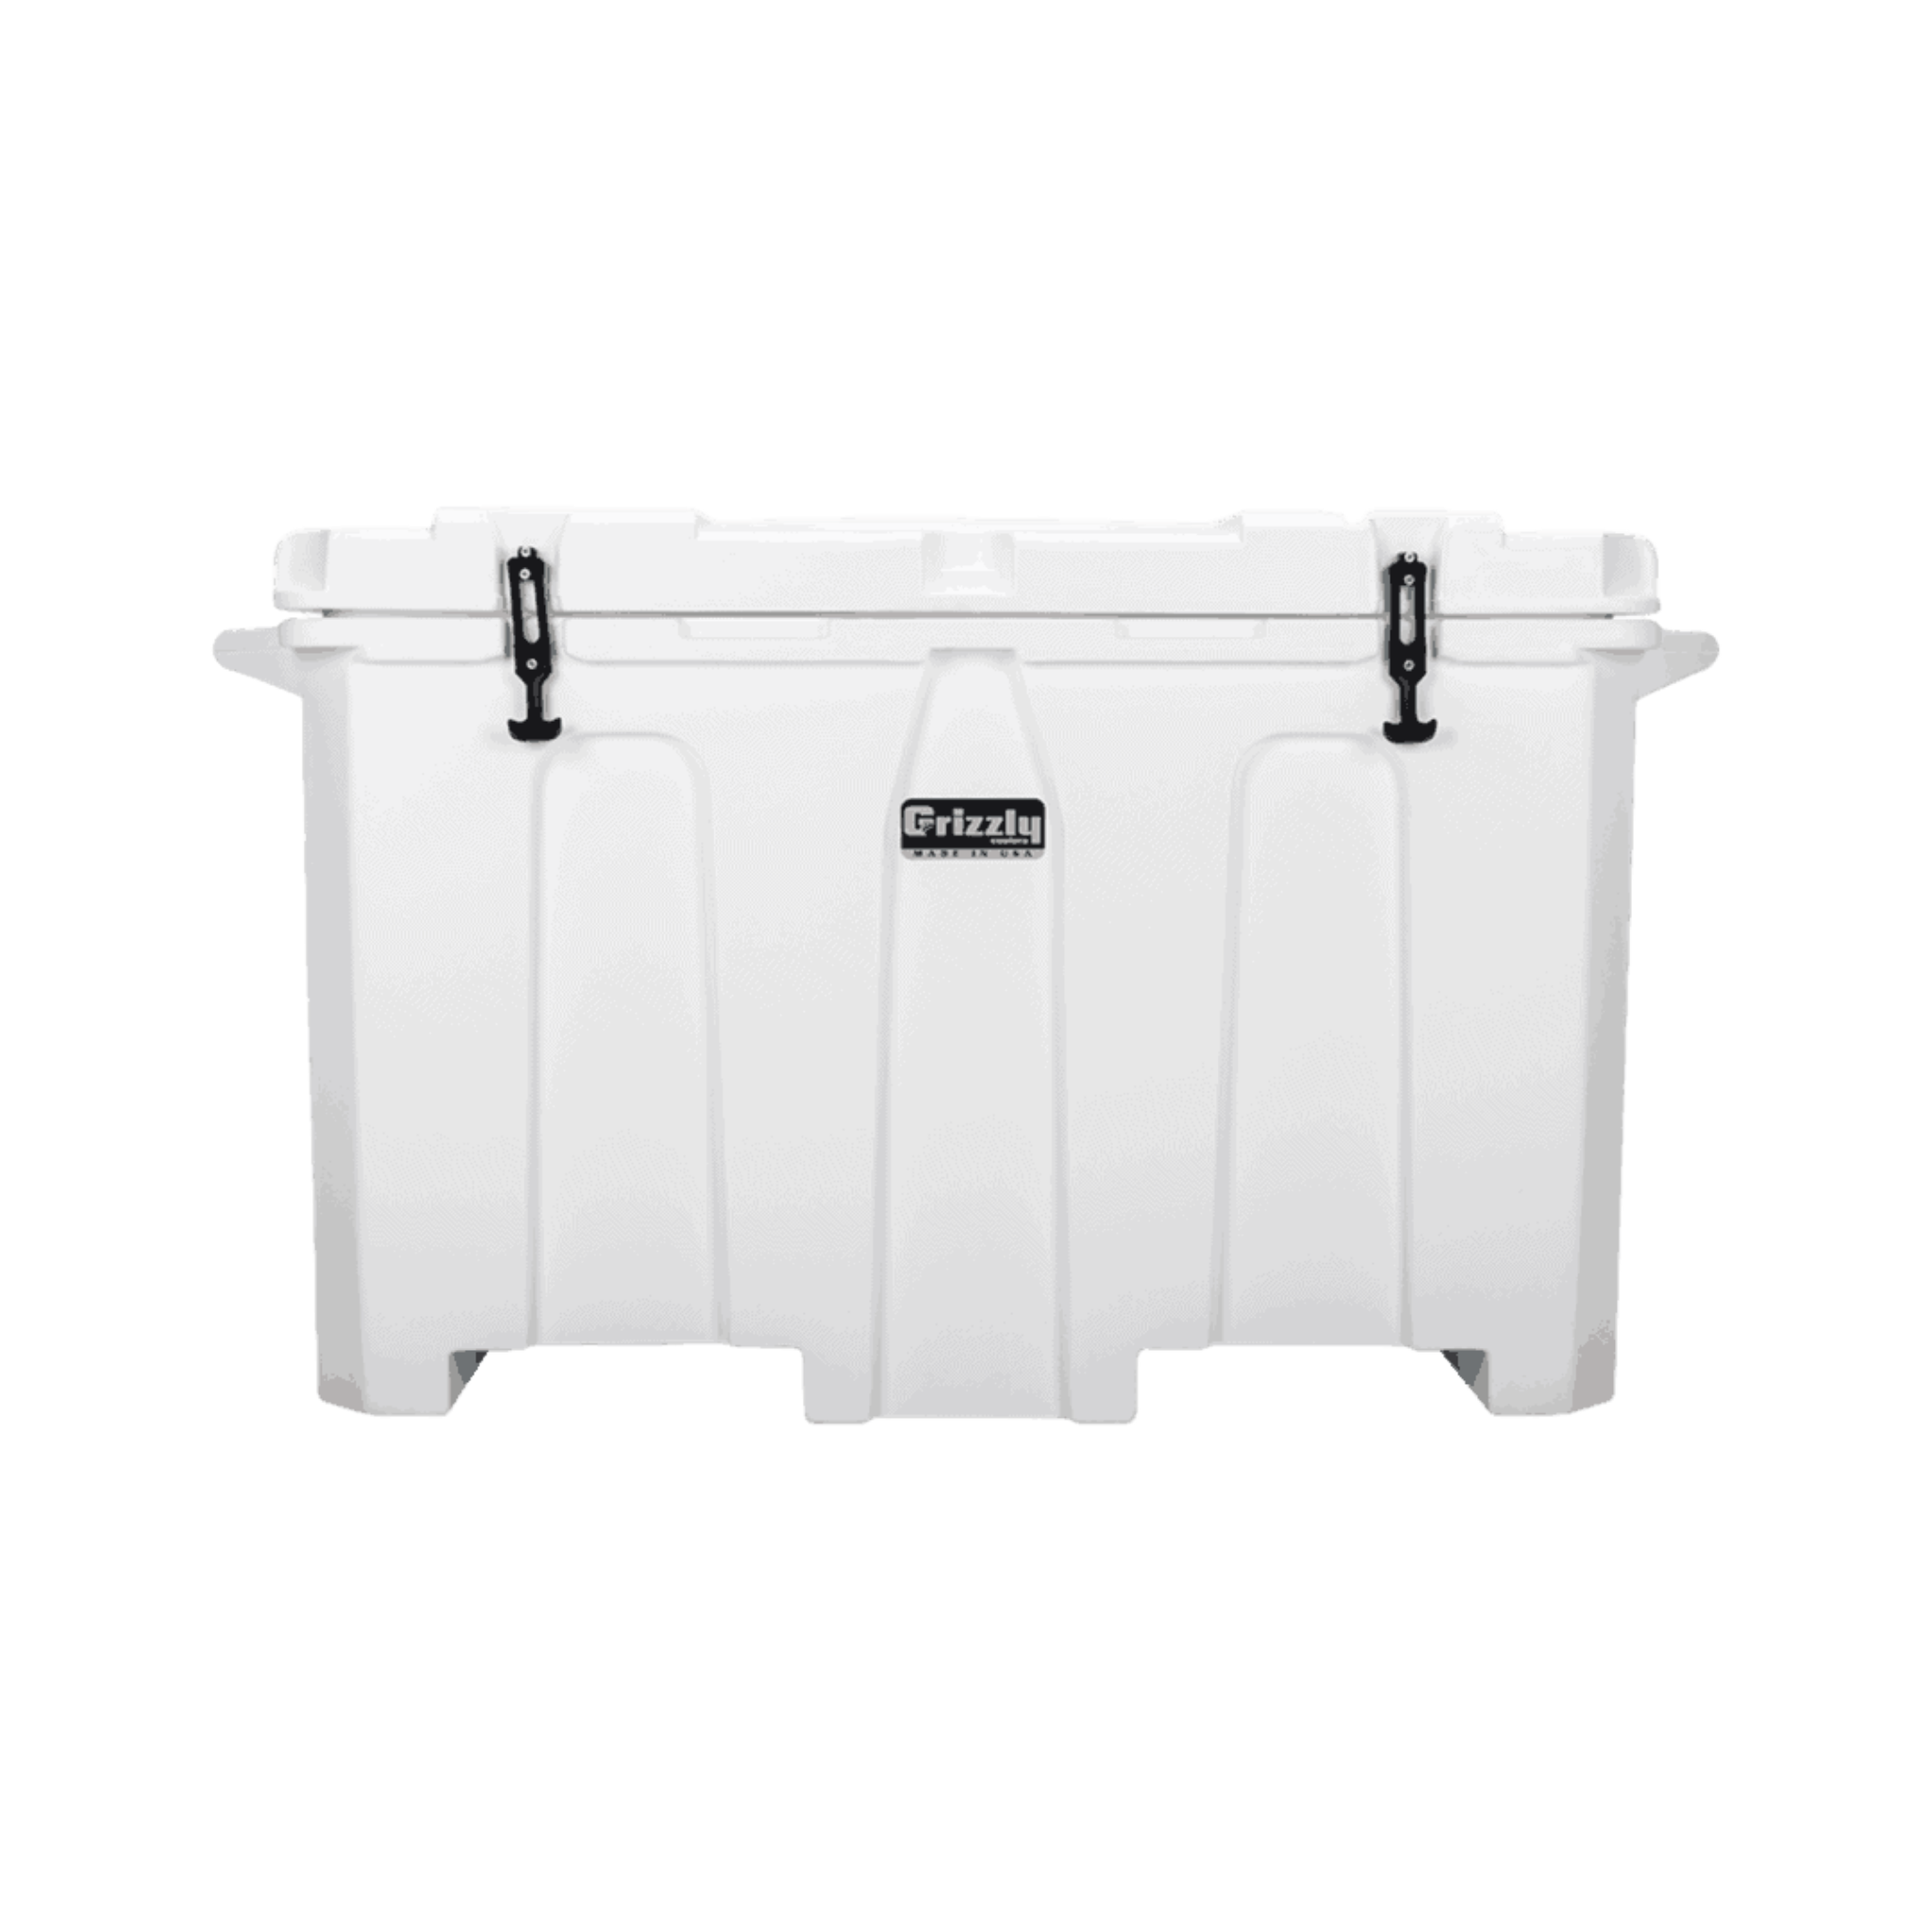 Grizzly Coolers | 400 Quart Cooler